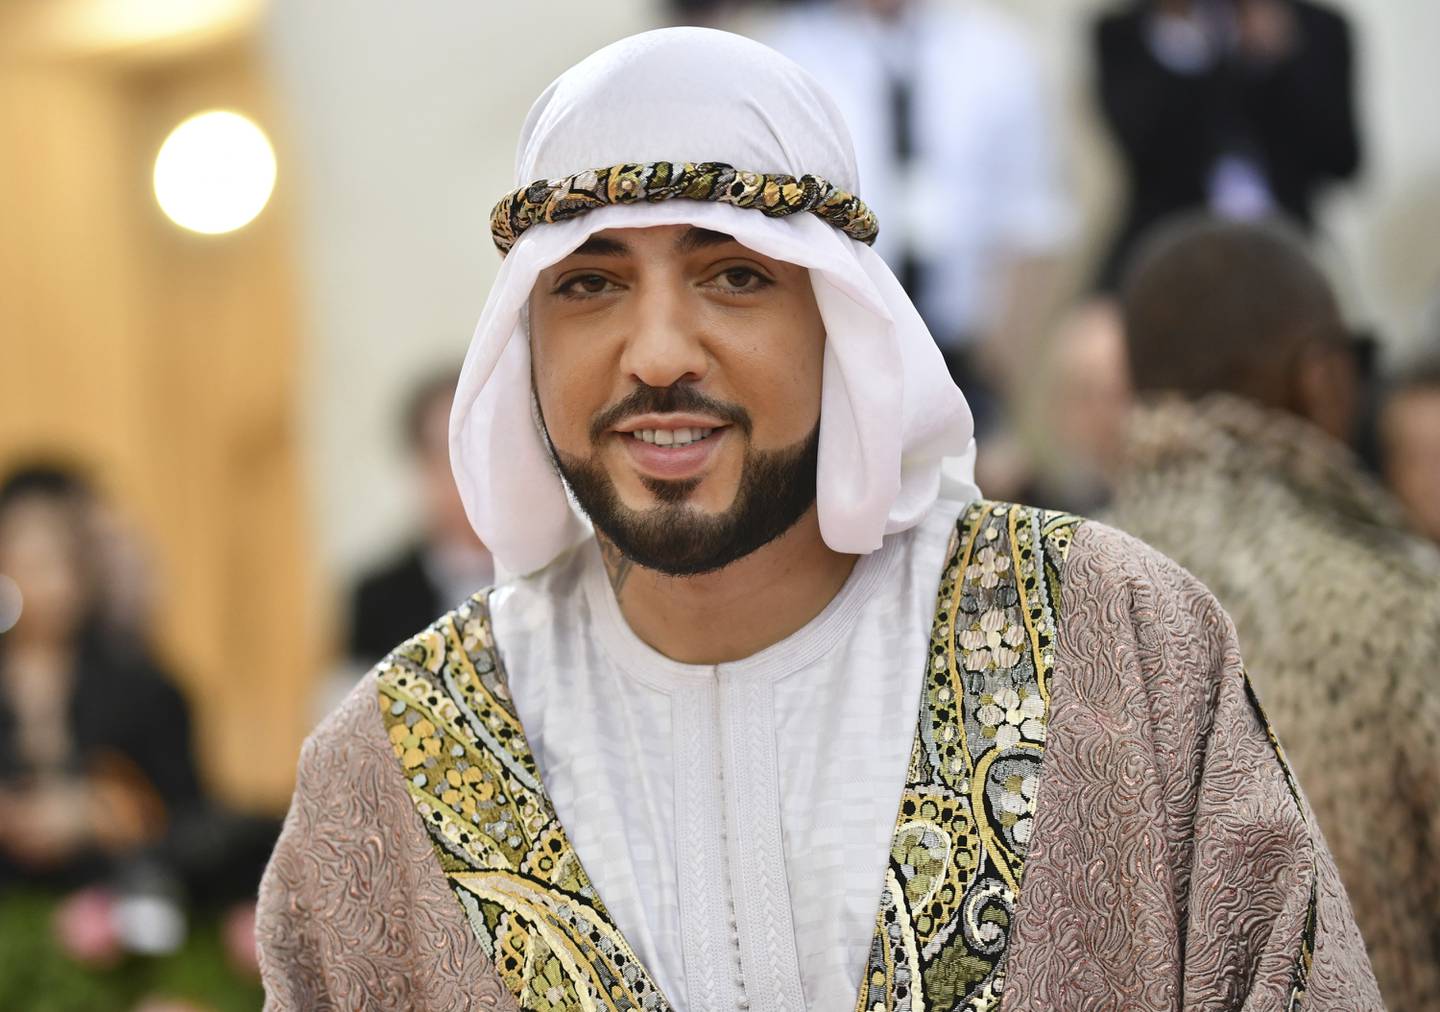 French Montana attends The Metropolitan Museum of Art's Costume Institute benefit gala celebrating the opening of the "Camp: Notes on Fashion" exhibition on Monday, May 6, 2019, in New York. (Photo by Charles Sykes/Invision/AP)